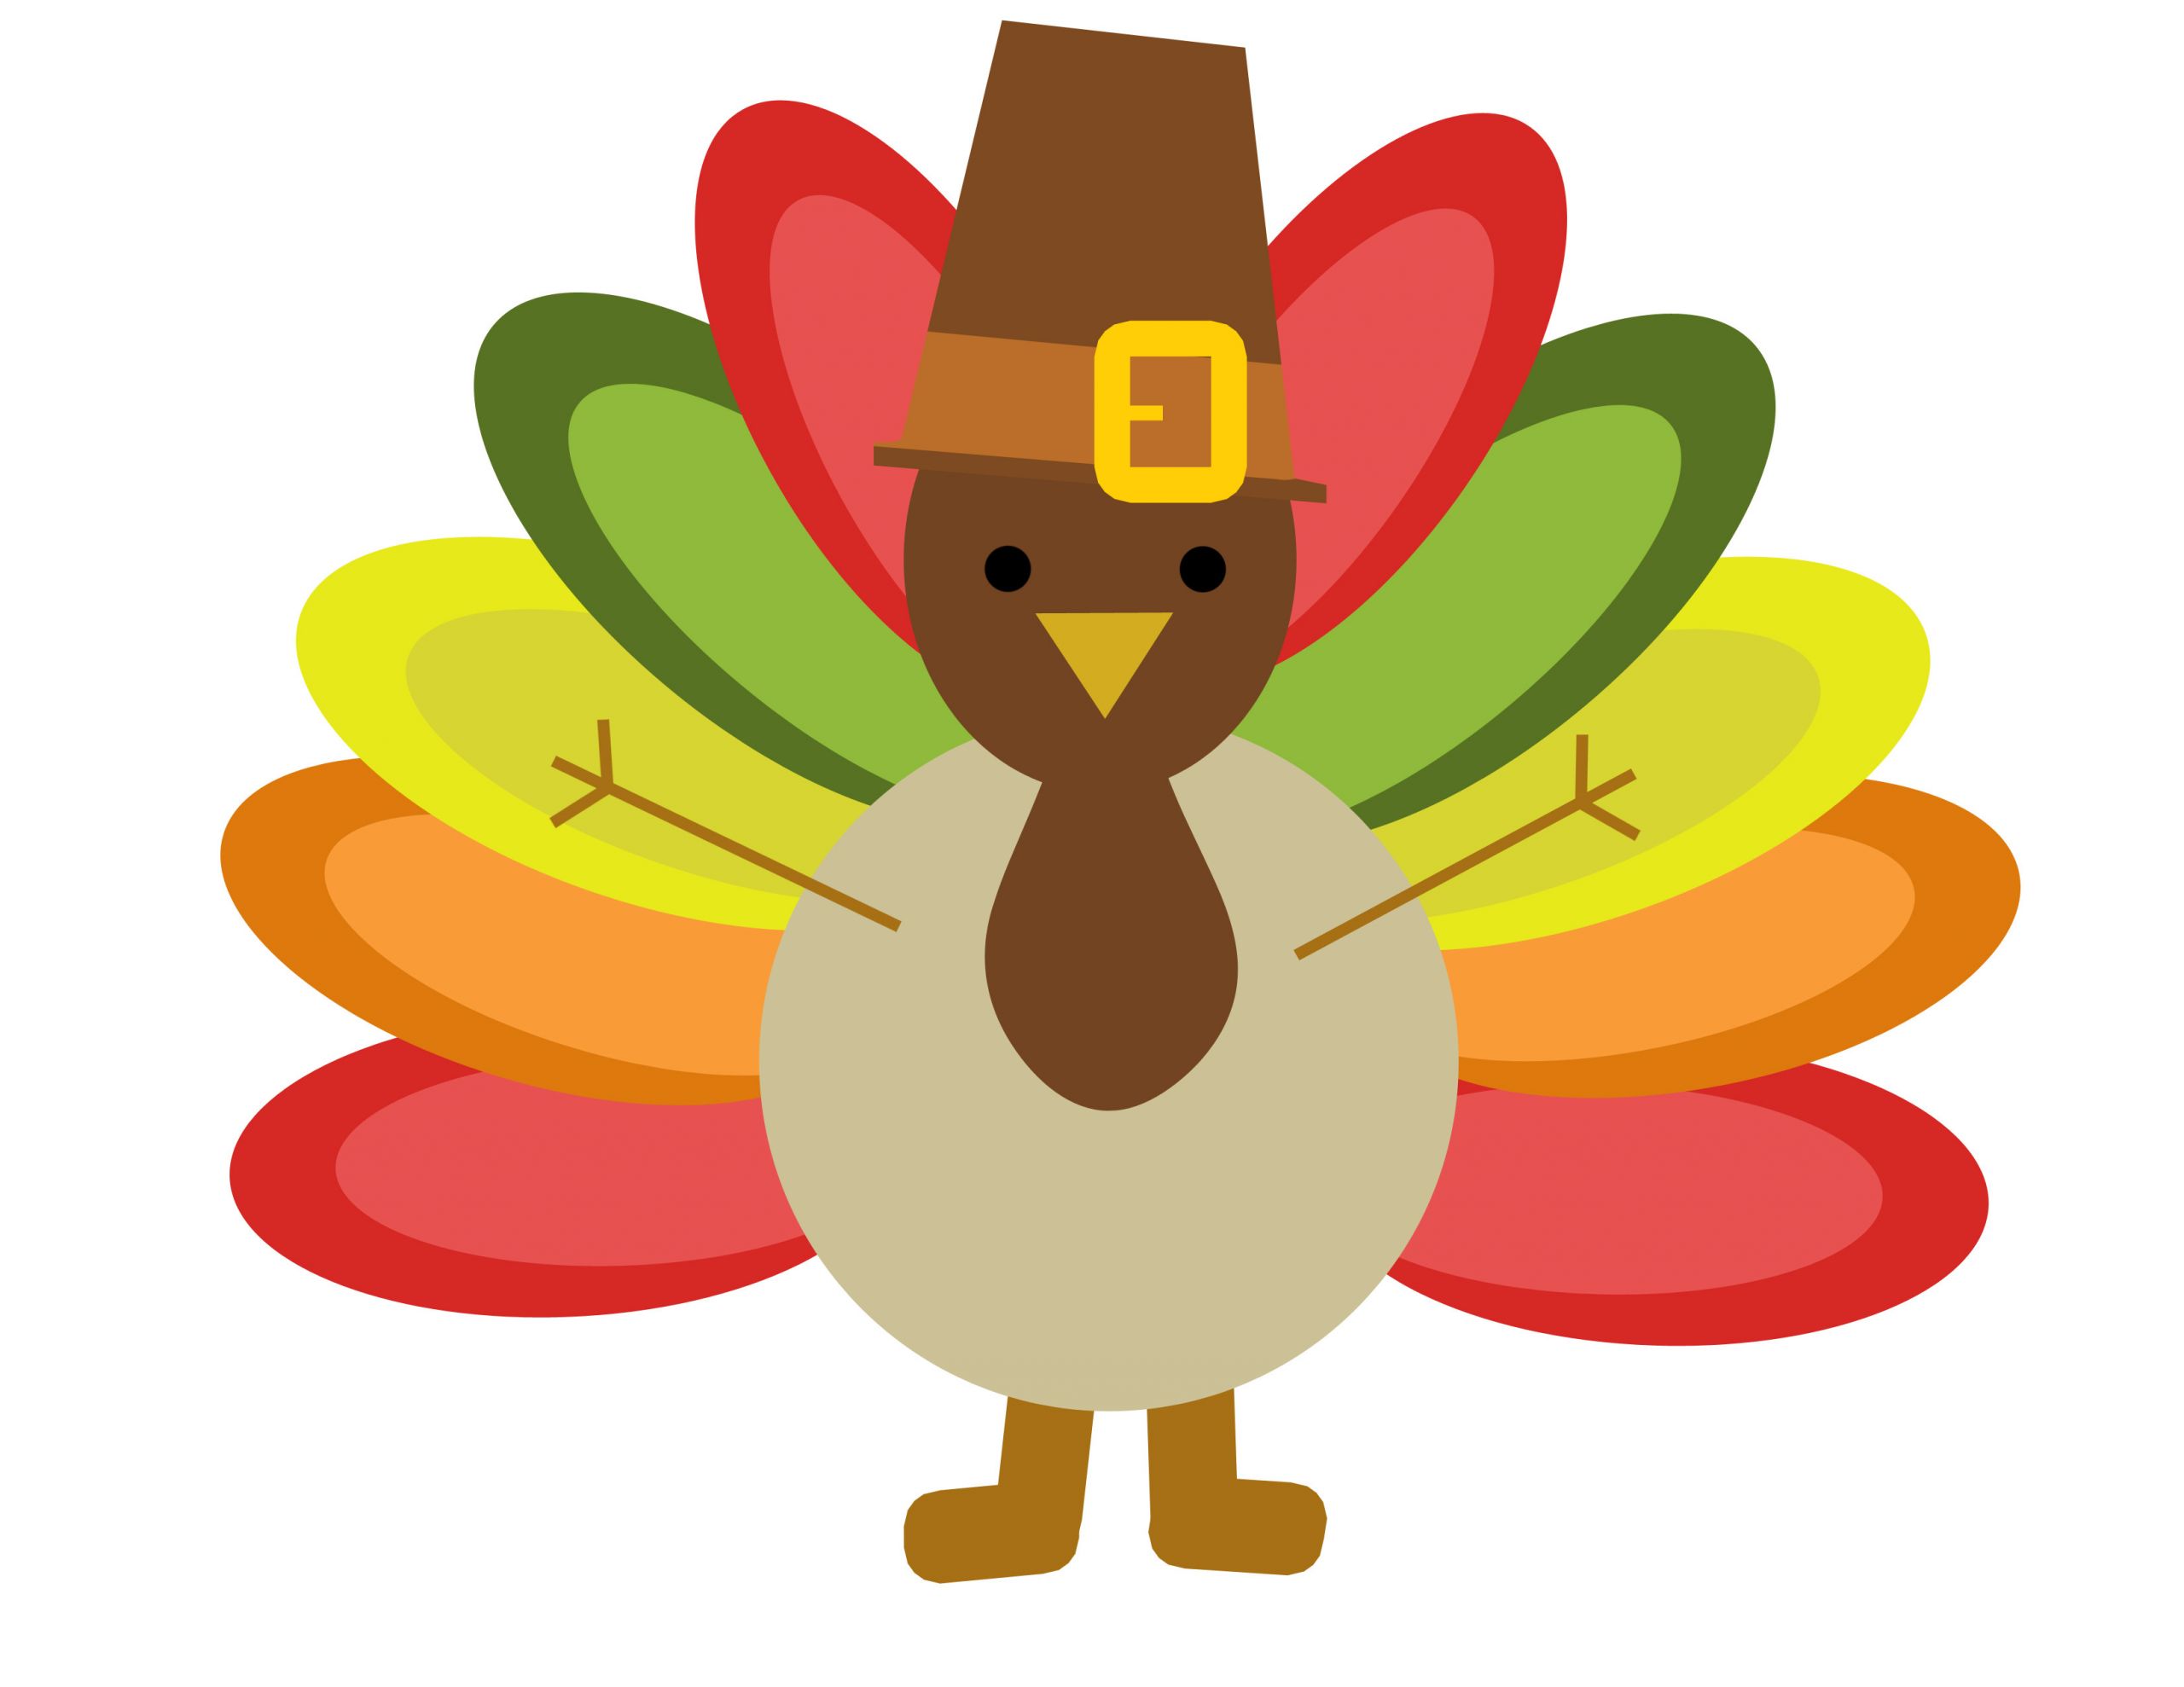 Best 30 Turkey Thanksgiving Cartoon Best Recipes Ideas and Collections